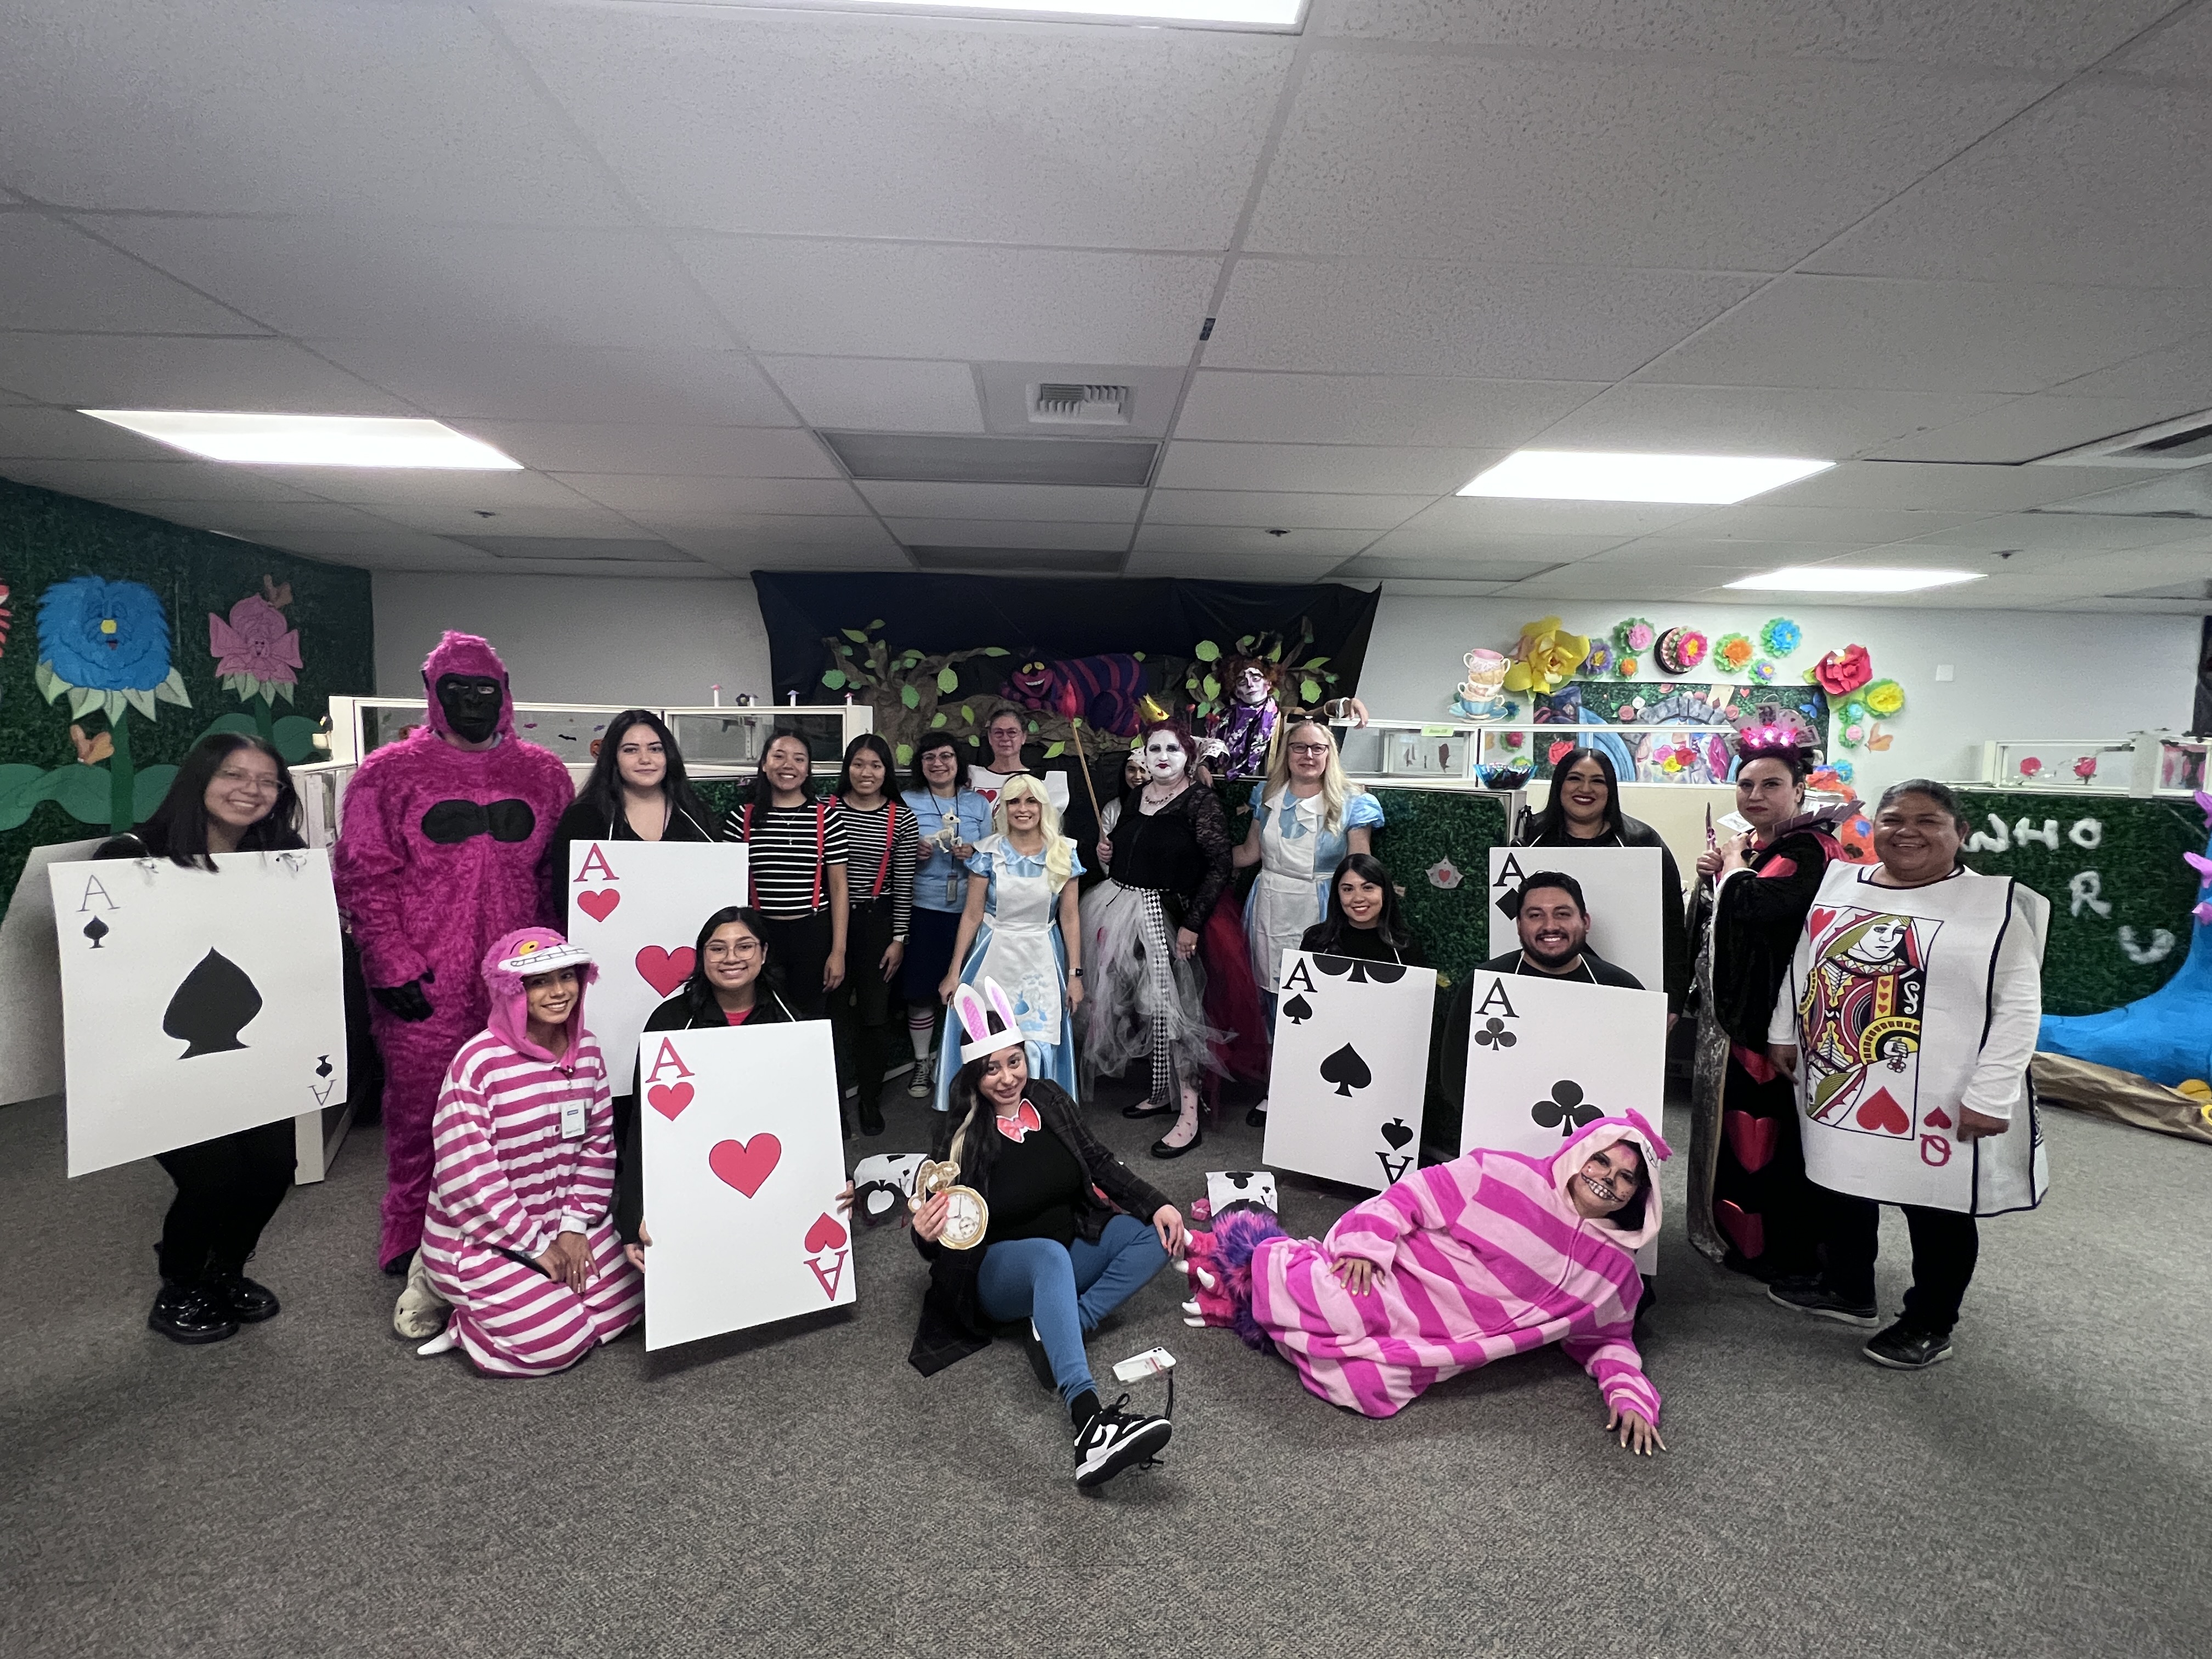 Population Research Center “Alice in Wonderland” group costumes in front of theme decorated office